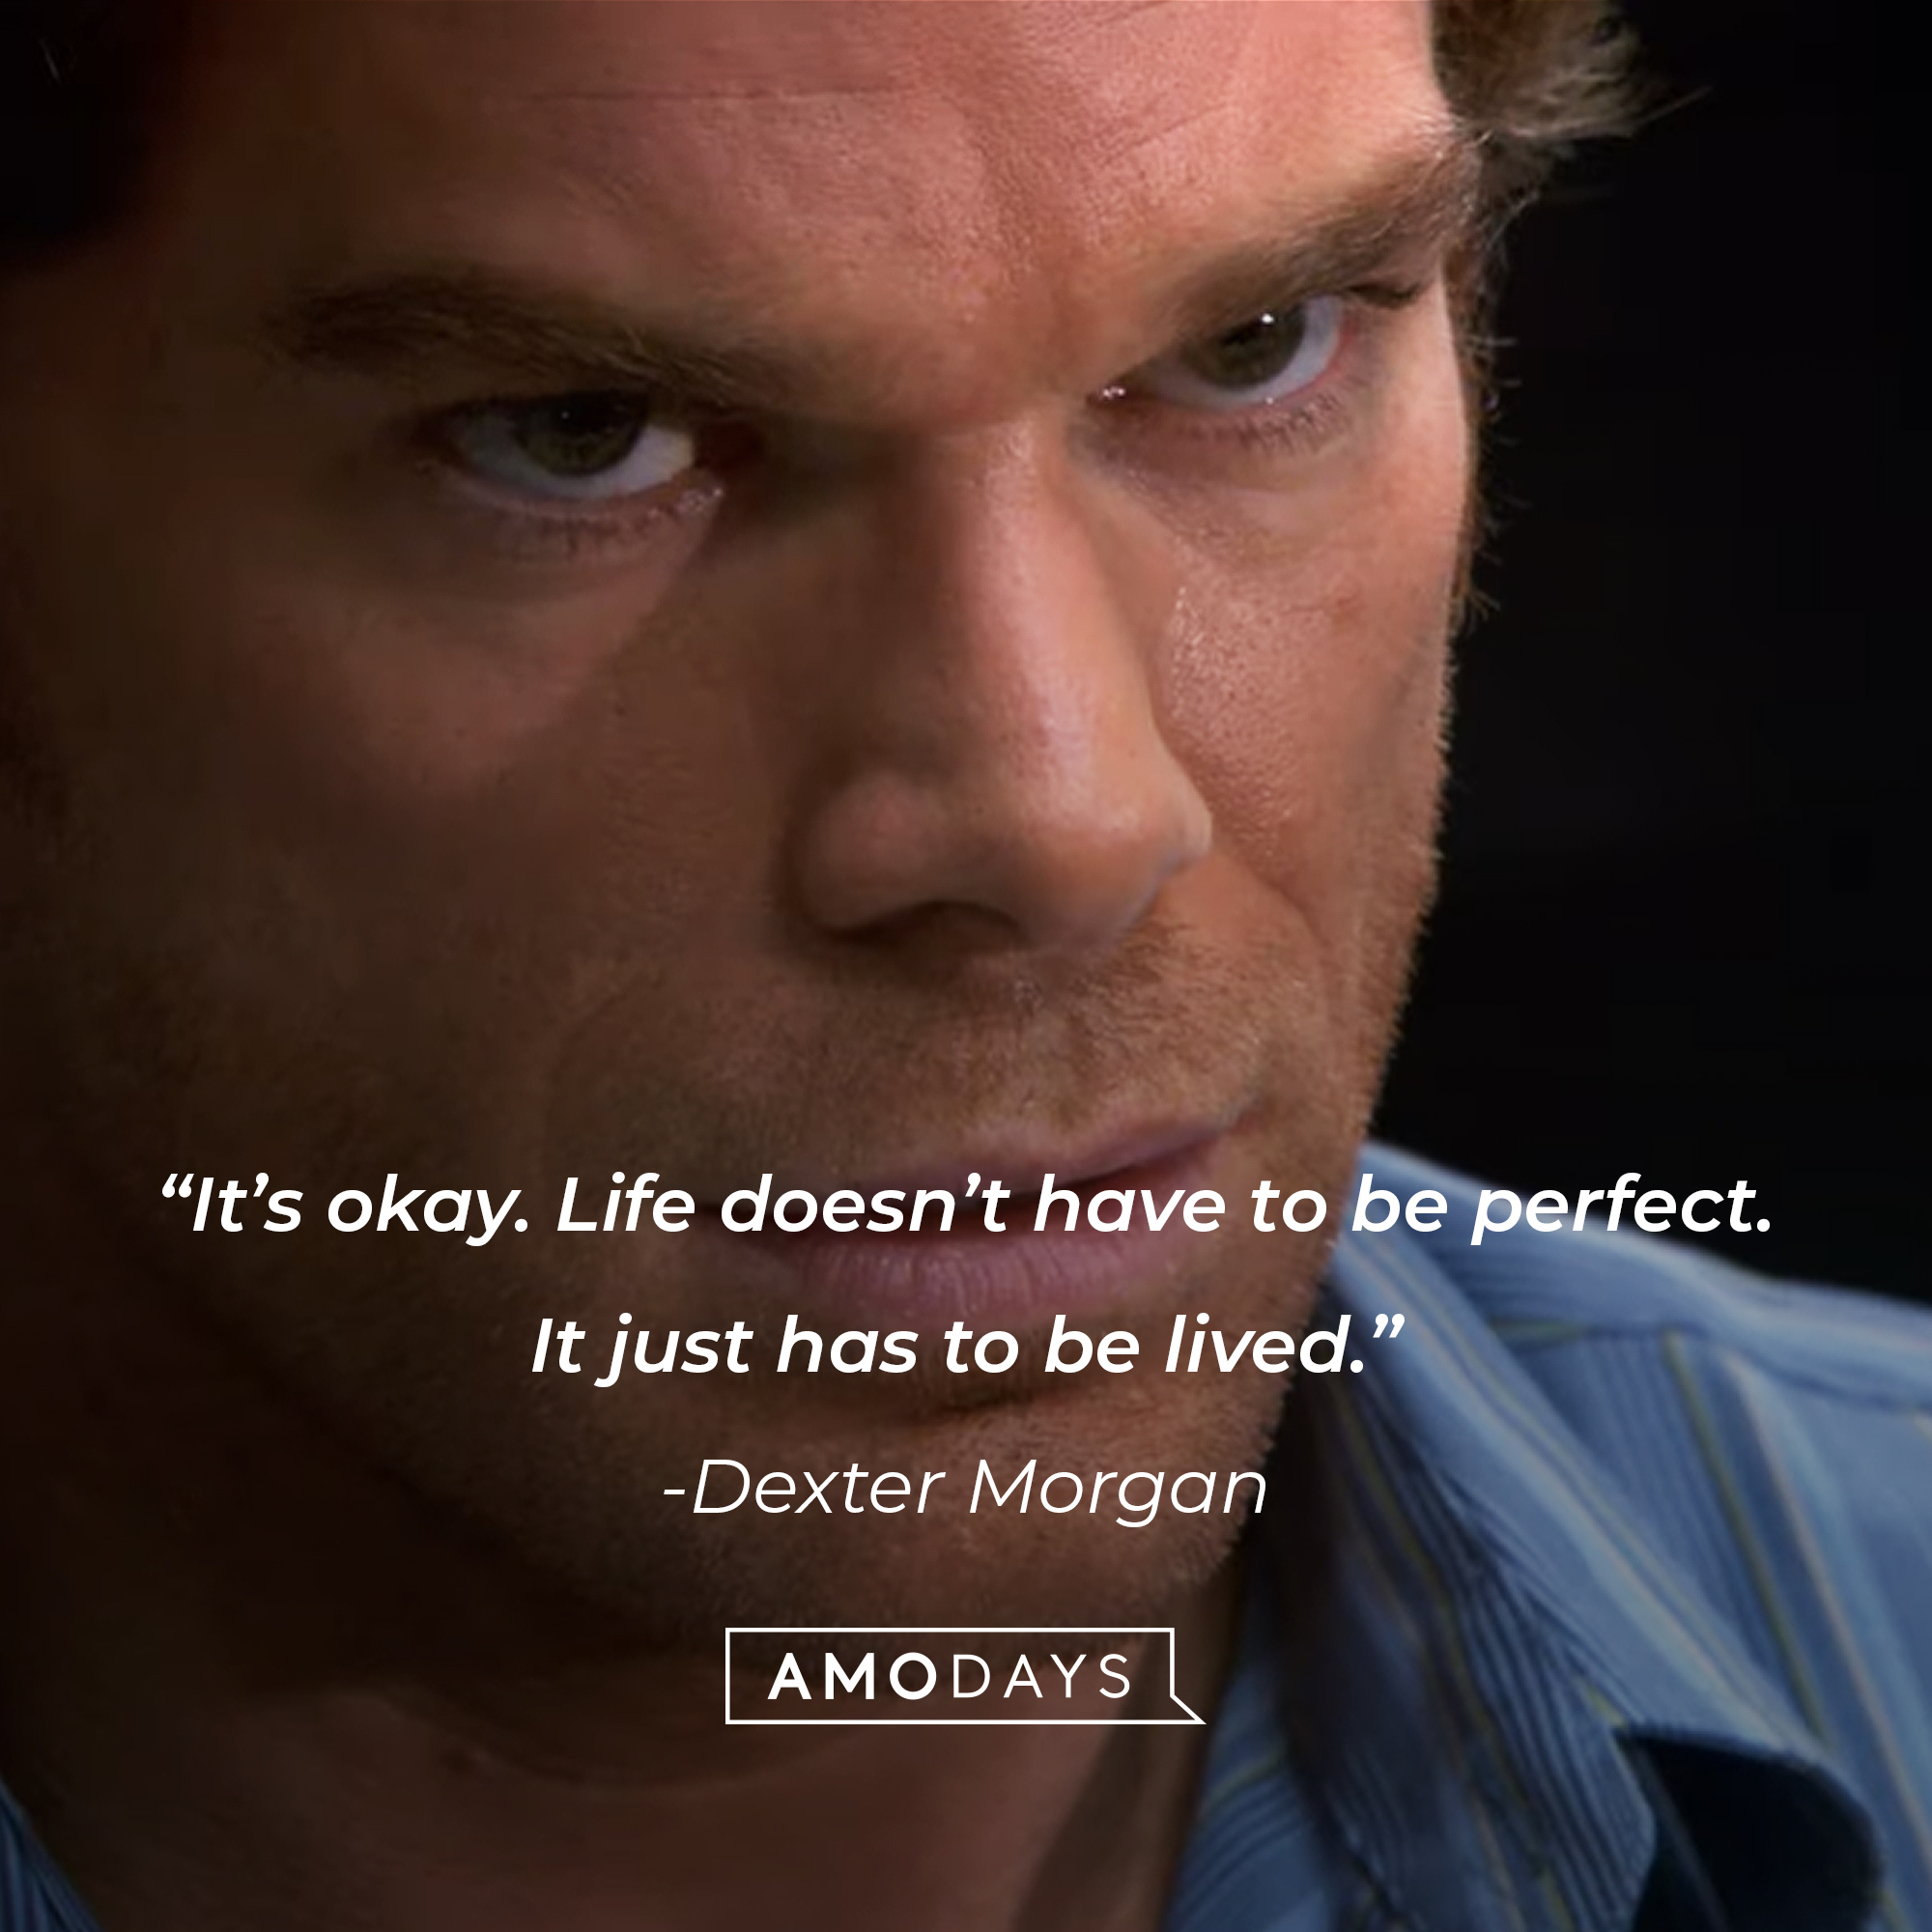 Dexter Morgan, with his quote: “It’s okay. Life doesn’t have to be perfect. It just has to be lived.” | Source: Showtime